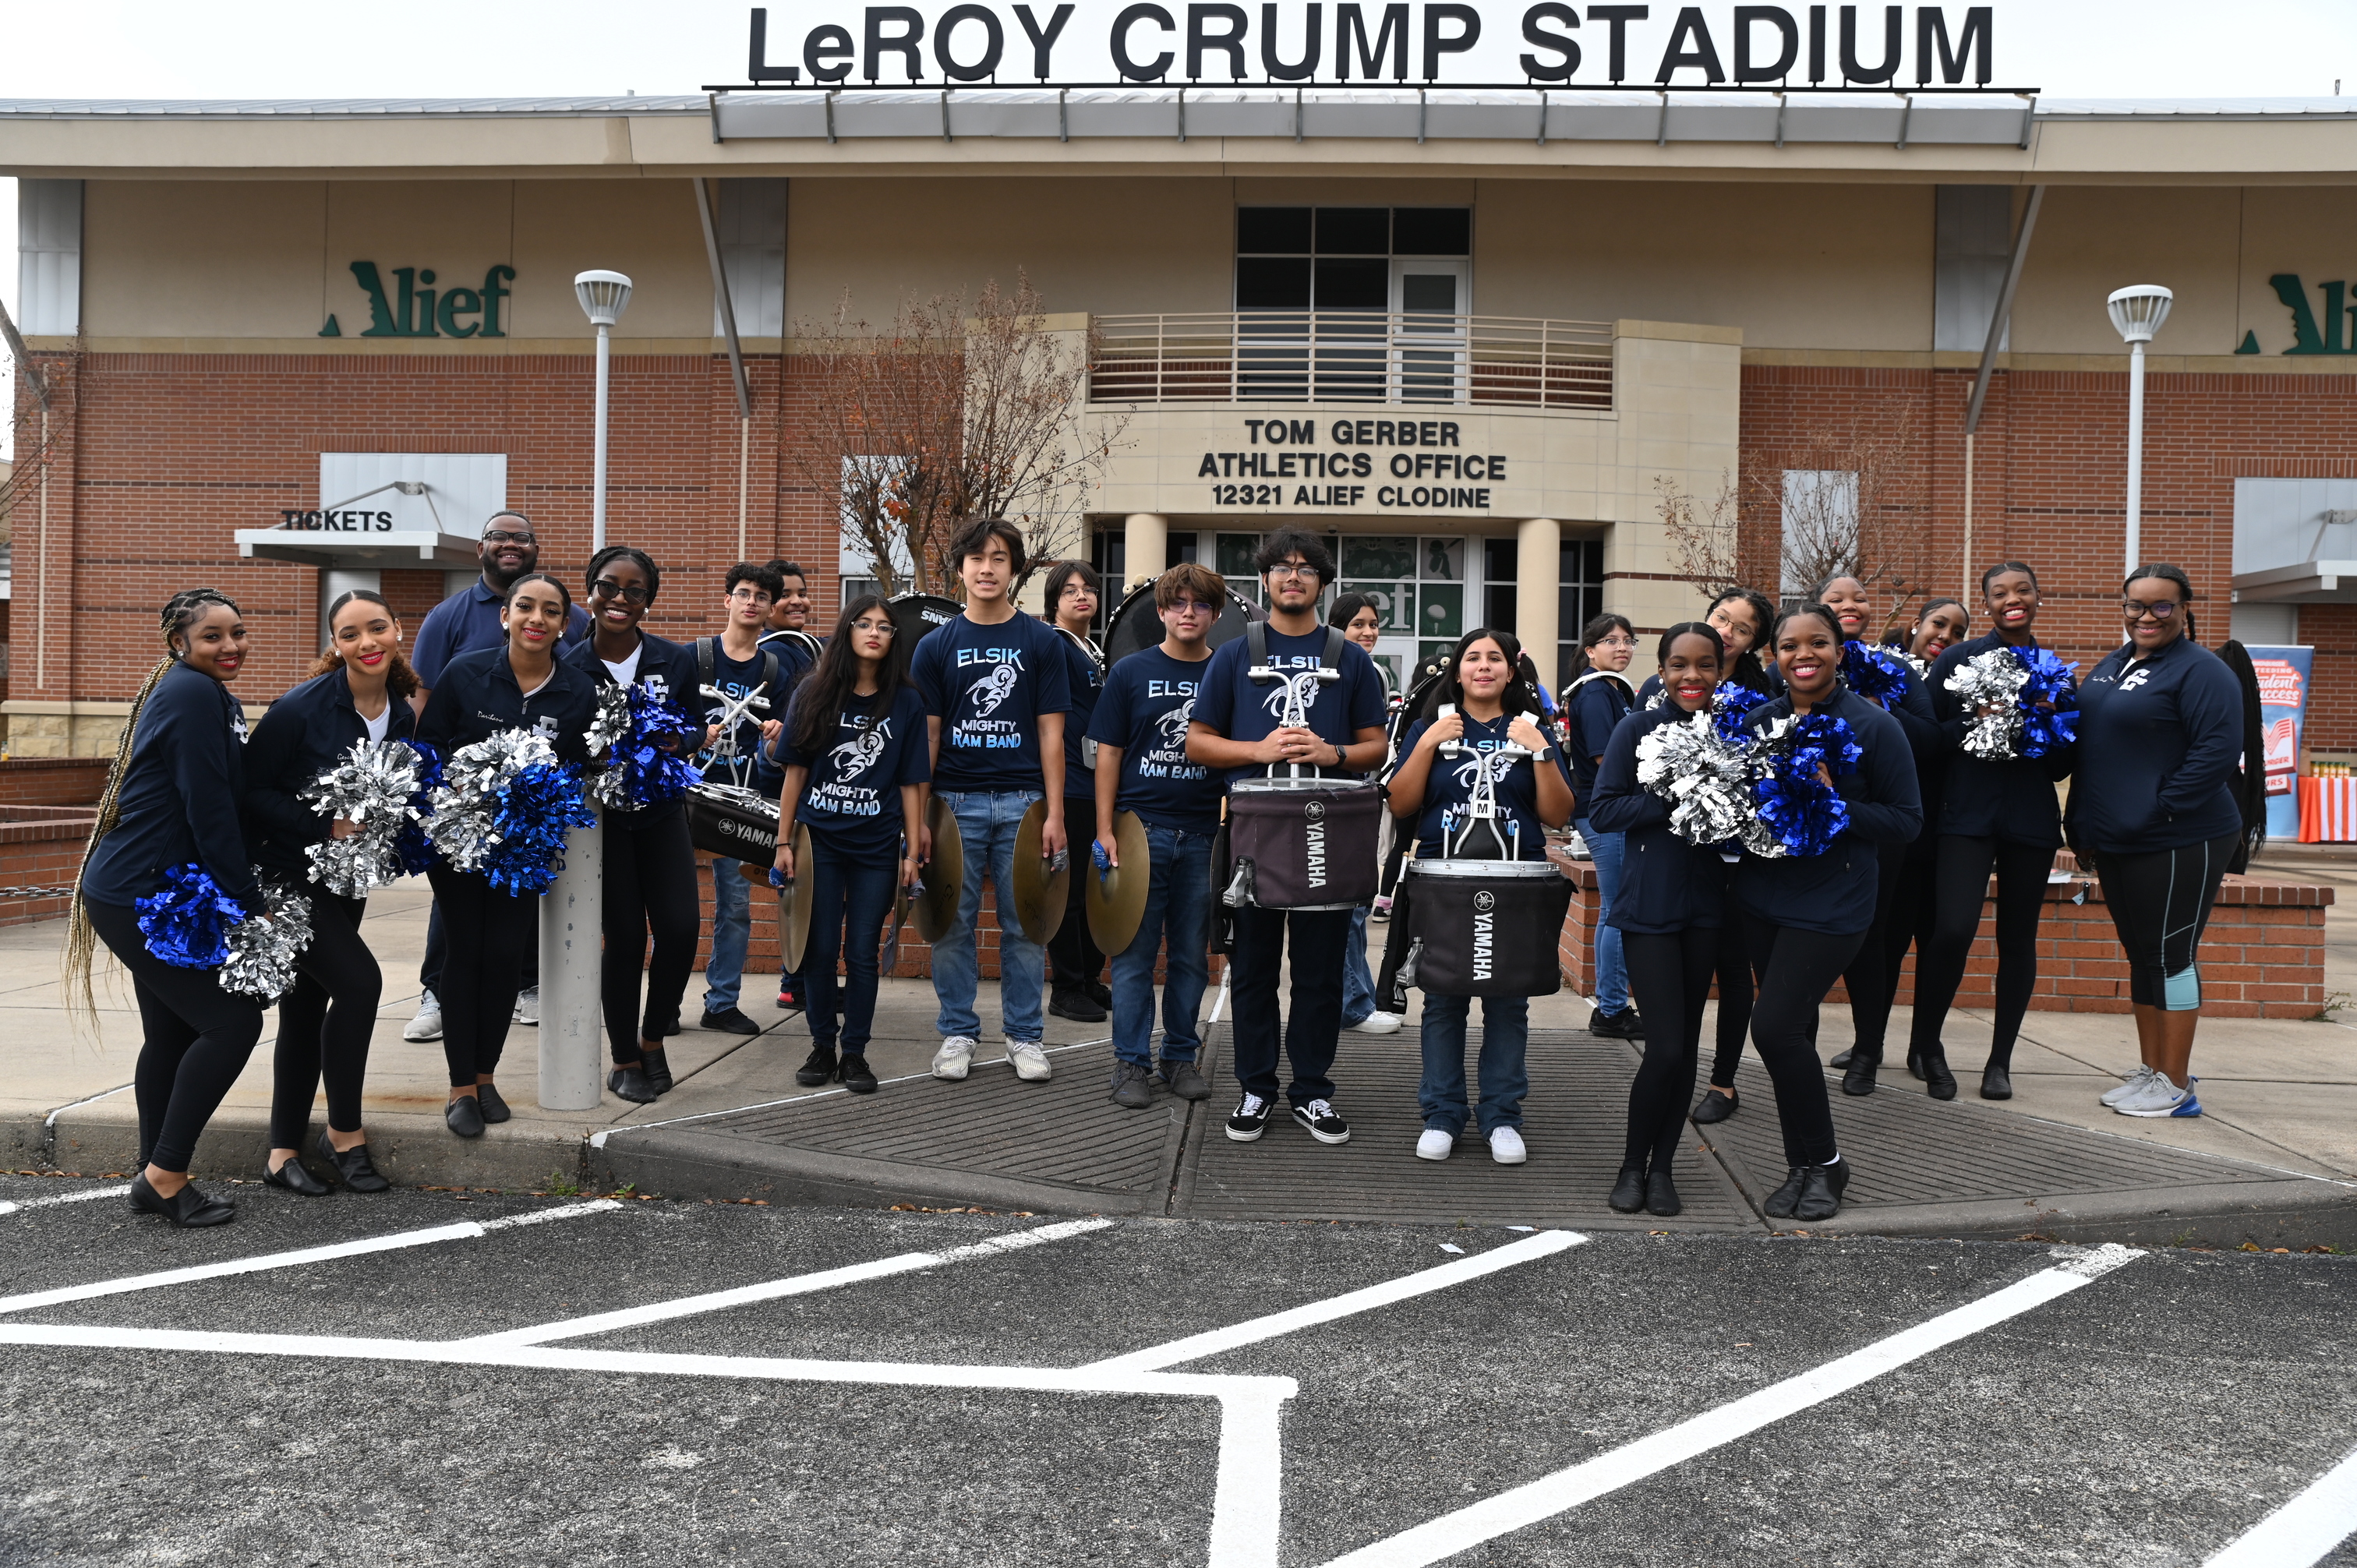 Alief ISD cheerleaders, mascots, choir students, and sponsors support the annual Stuff-A-Bus by performing for community members and donating uniforms and school supplies for our pantry.